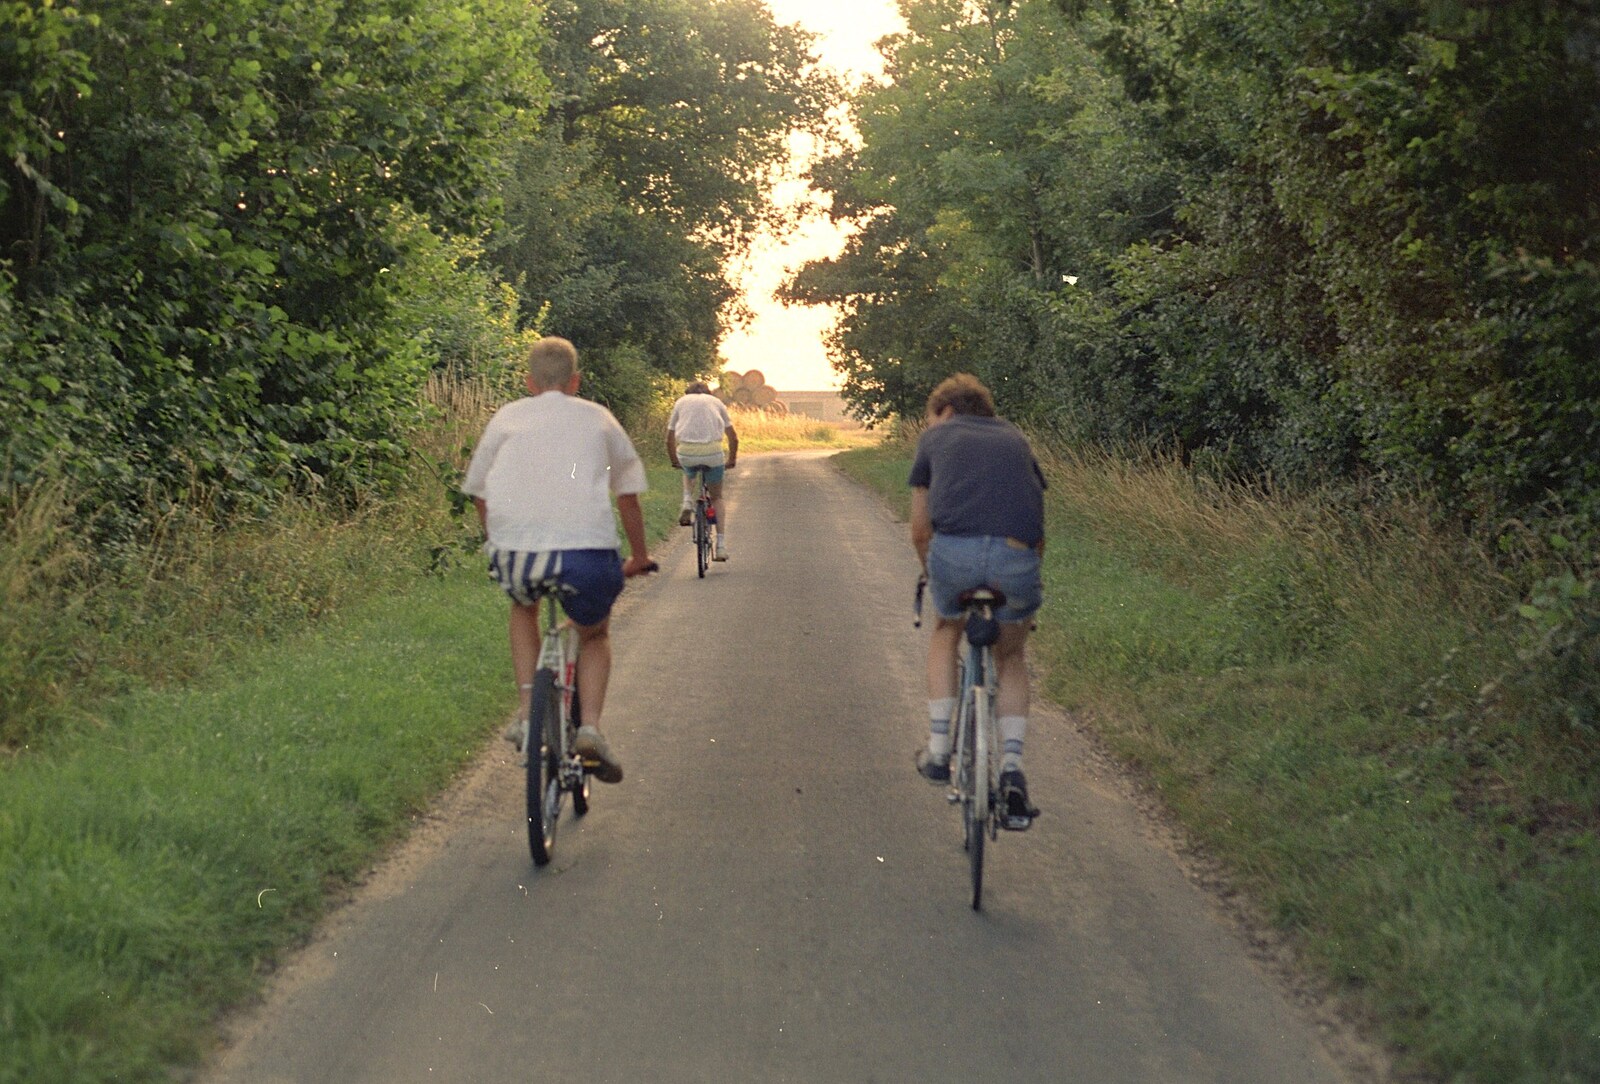 Bill, Al and Apple on the road from A BSCC Ride to the Six Bells, Gislingham, Suffolk - 21st May 1996